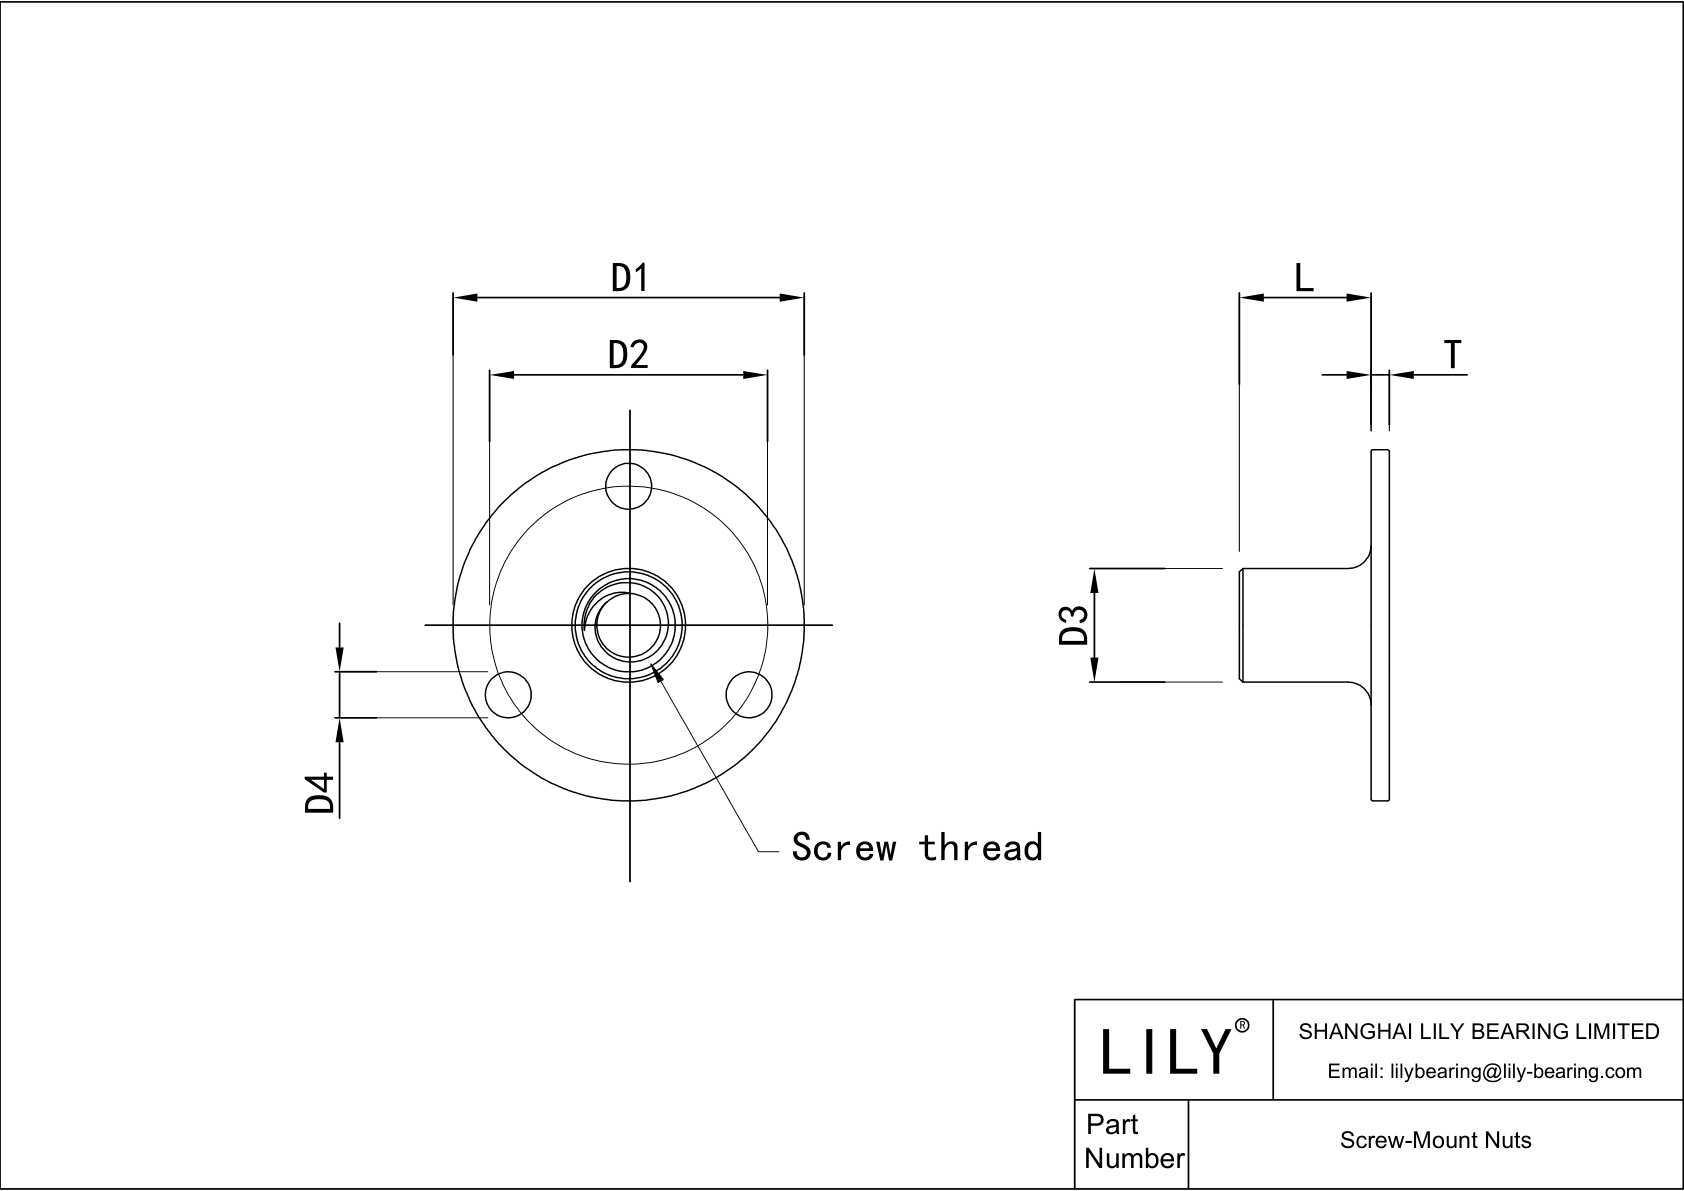 JEBCCACAA Screw-Mount Nuts cad drawing